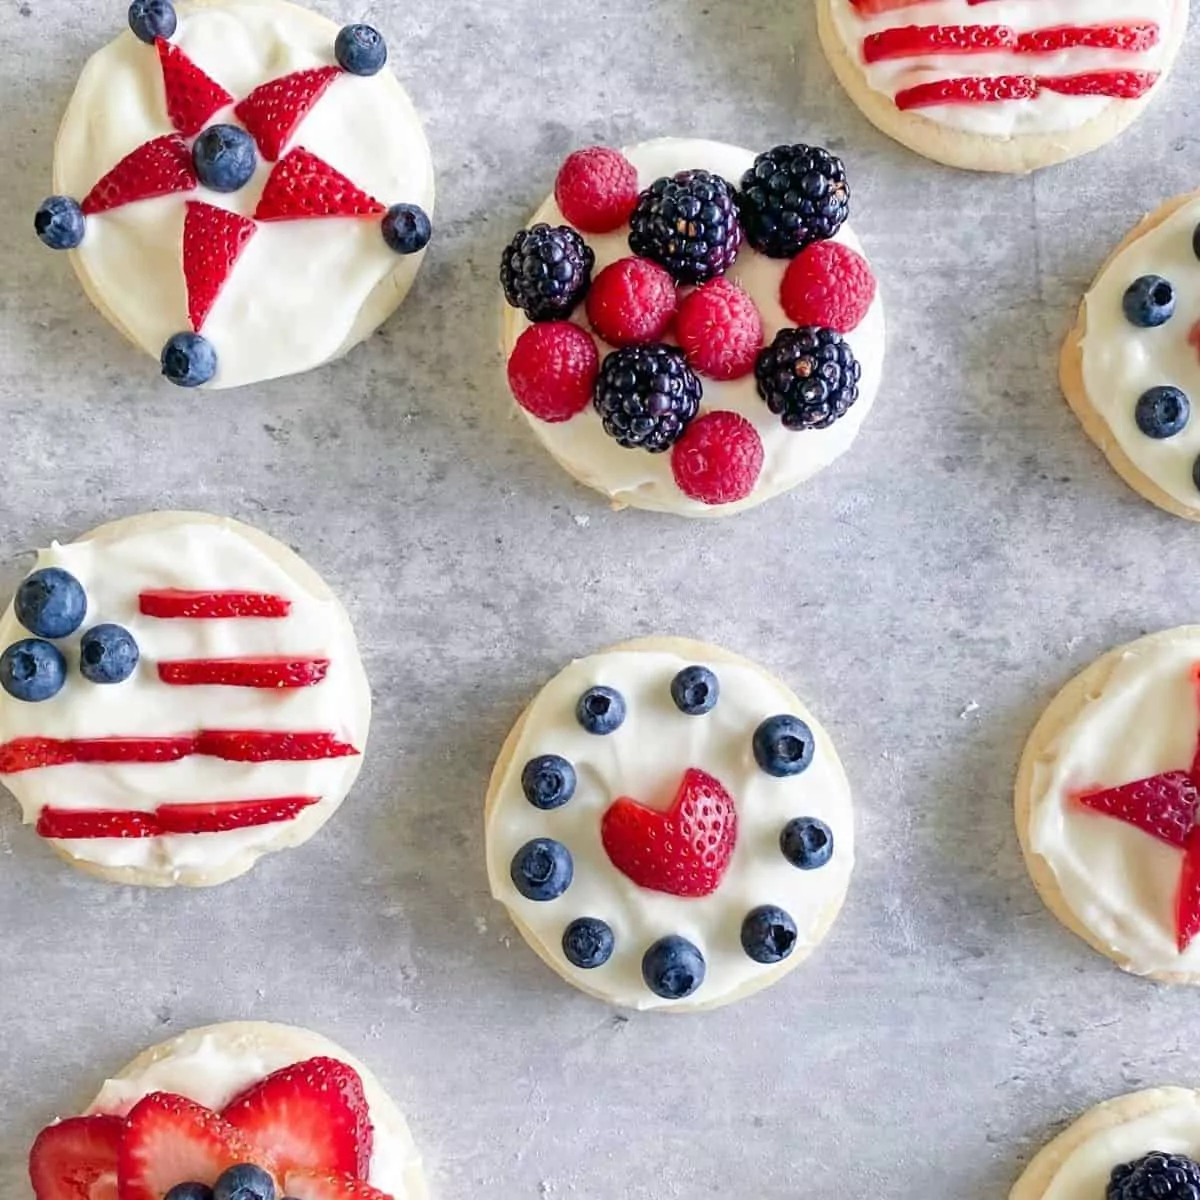 soft cookies decorated with white frosting, strawberries and blueberries.